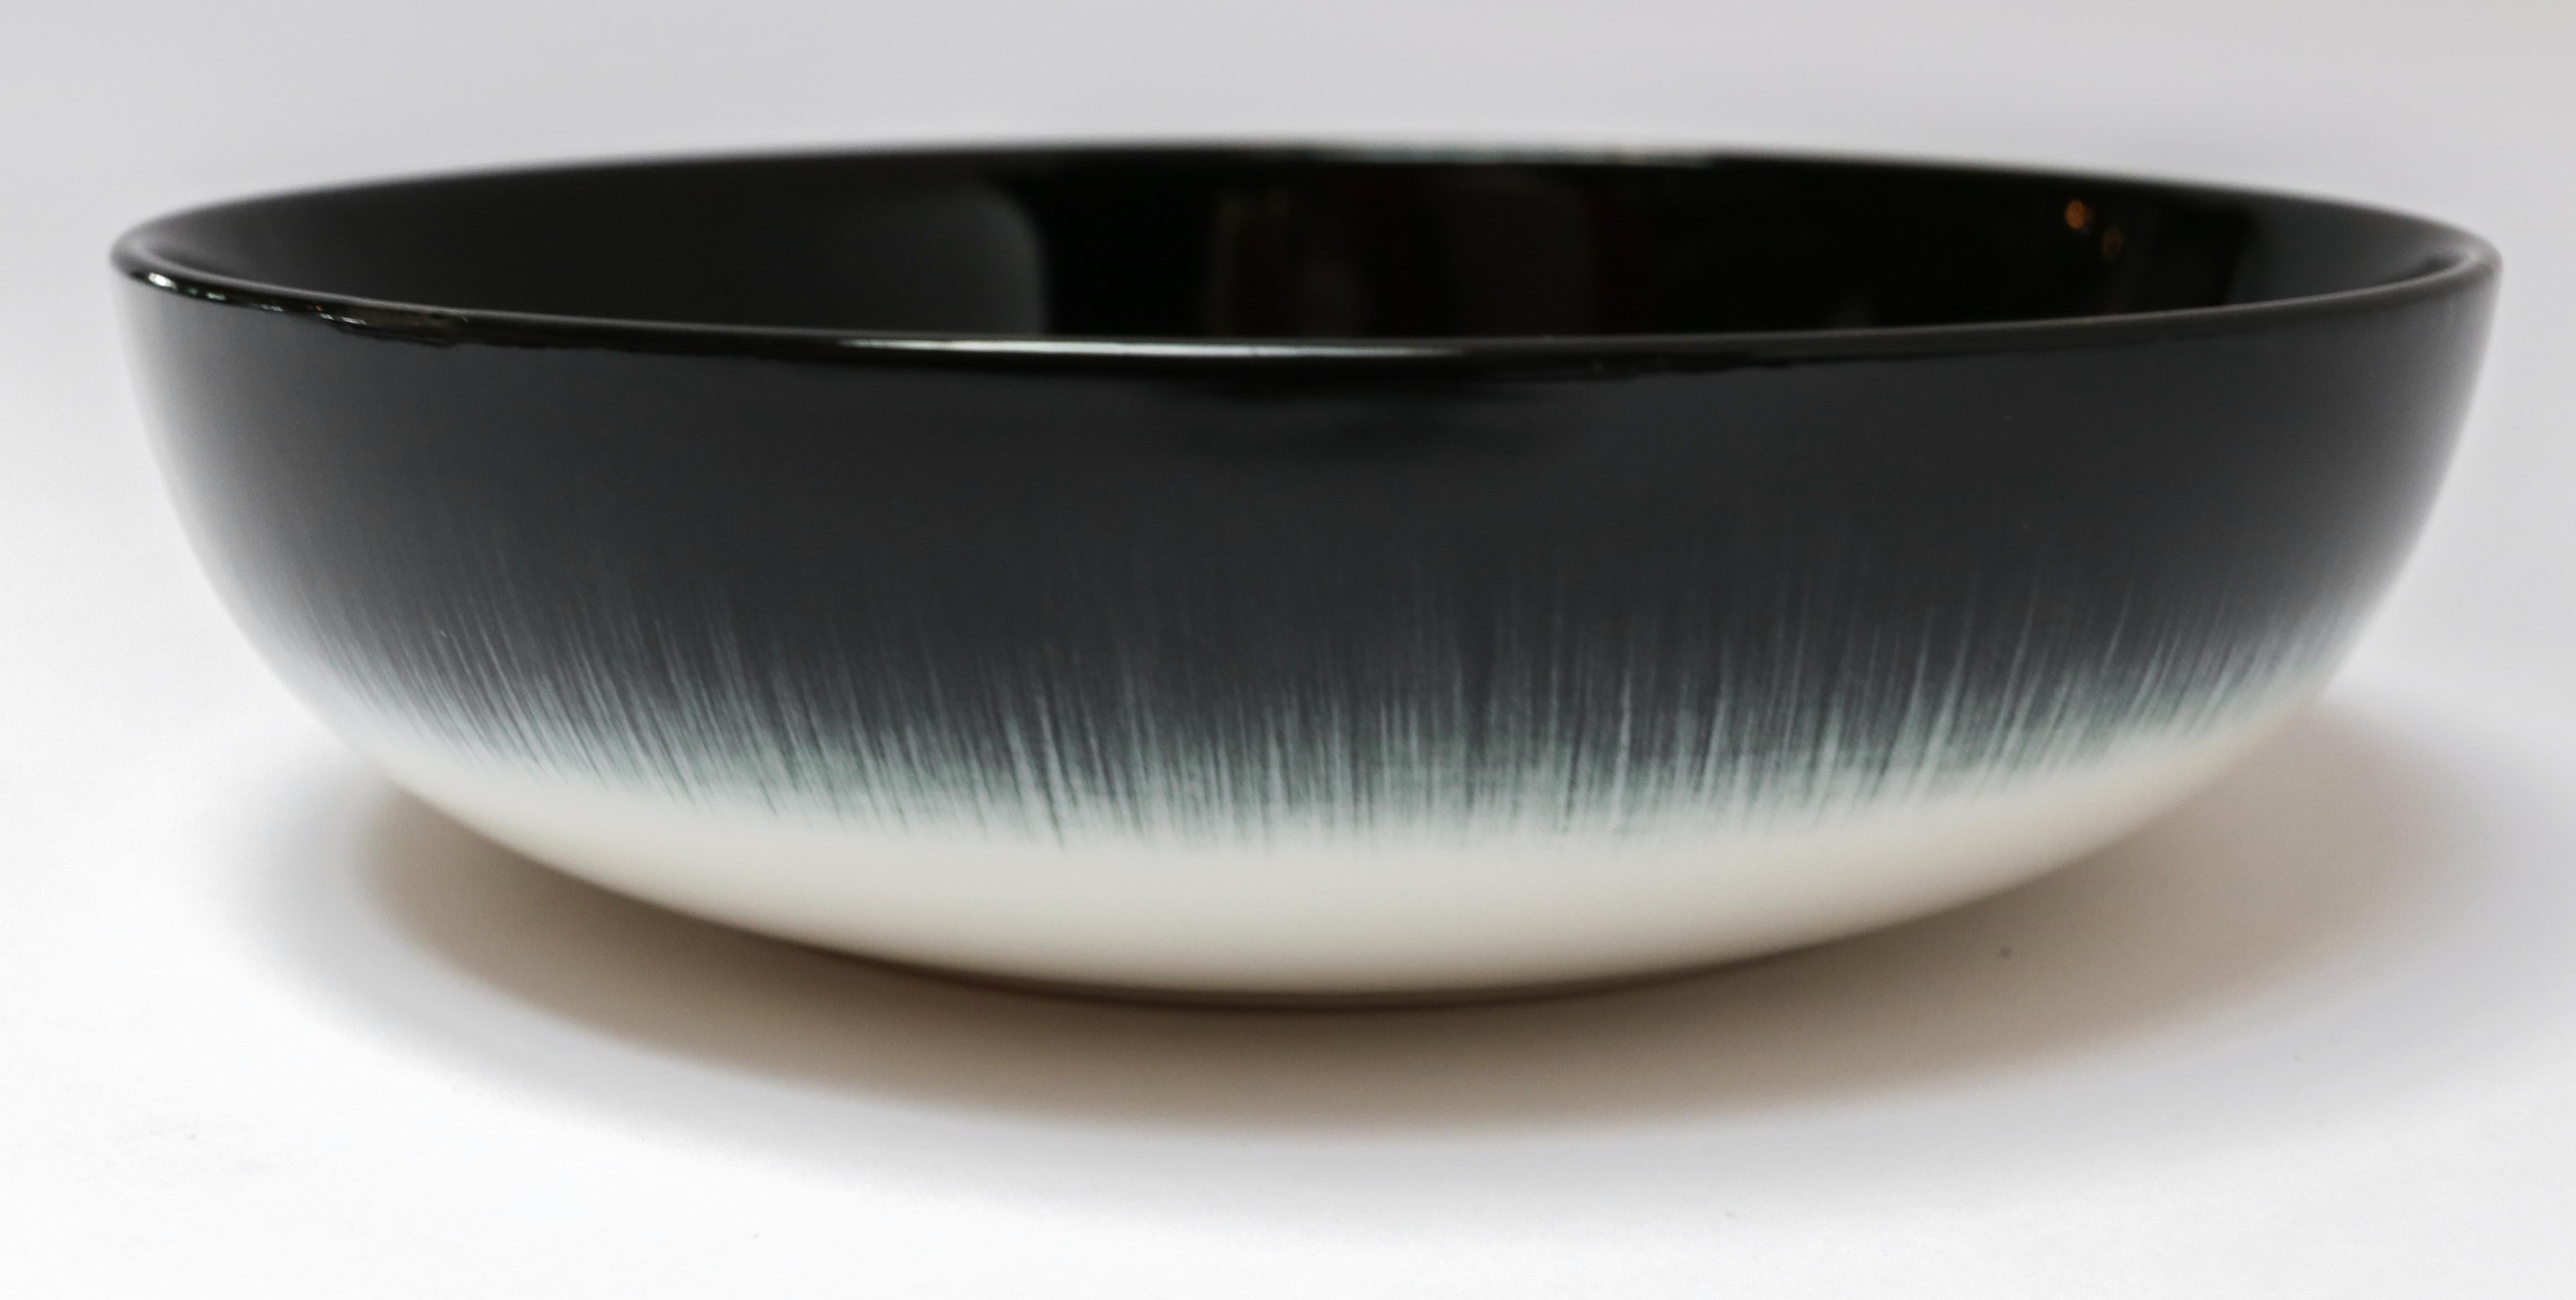 Ann Demeulemeester for Serax Dé small high plate / bowl in off white / black. Hand painted with a starburst pattern. Measures: 15.5cm diameter x 4.2 cm high. Must be purchased in quantities of two.